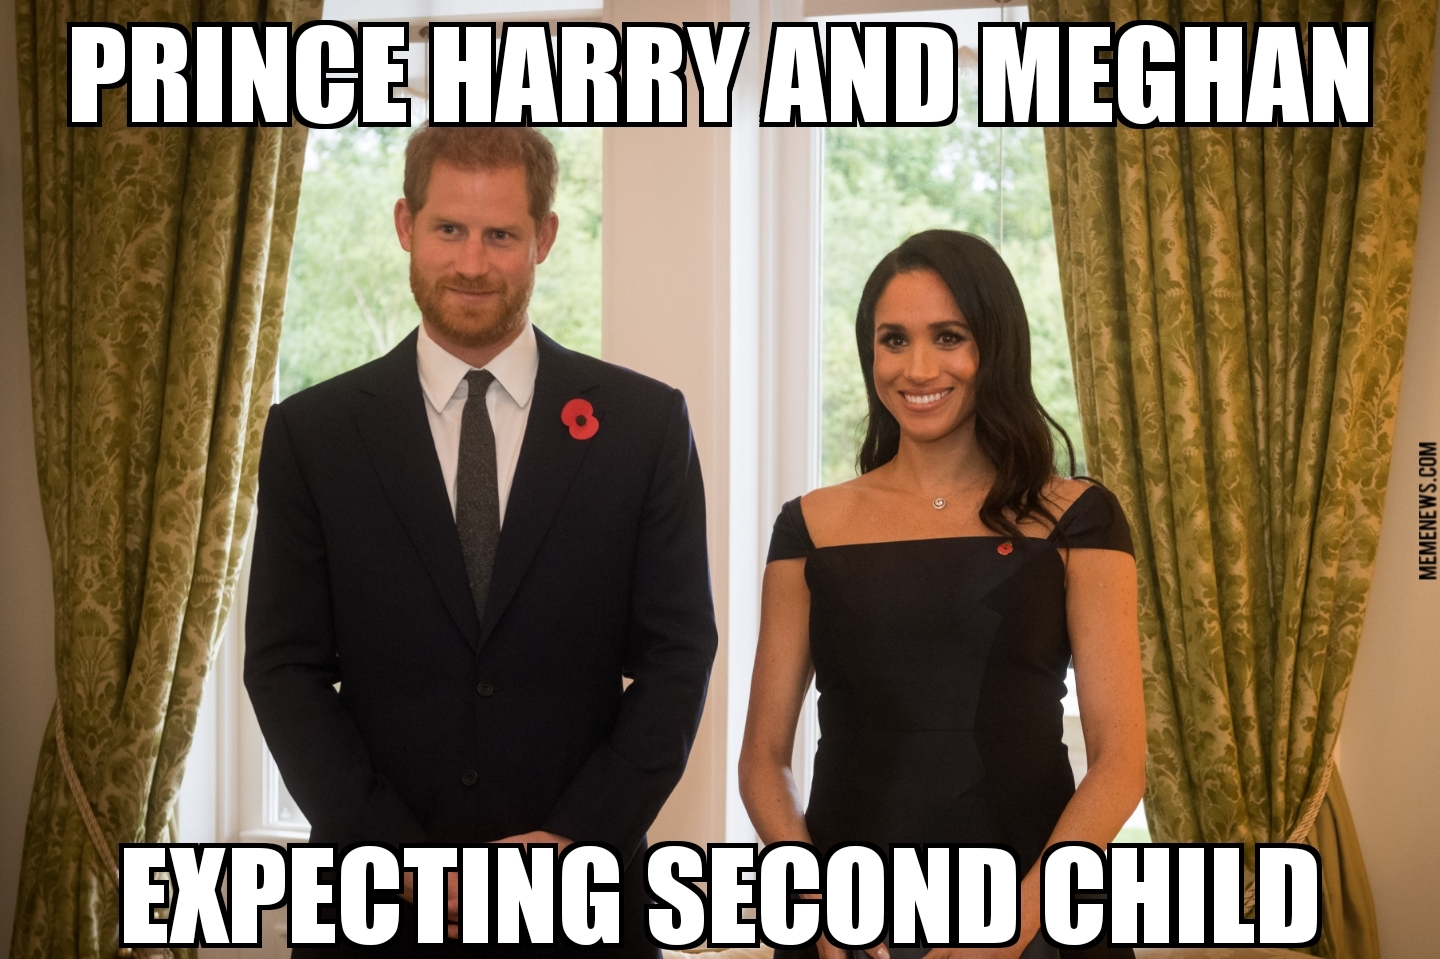 Harry and Meghan expecting